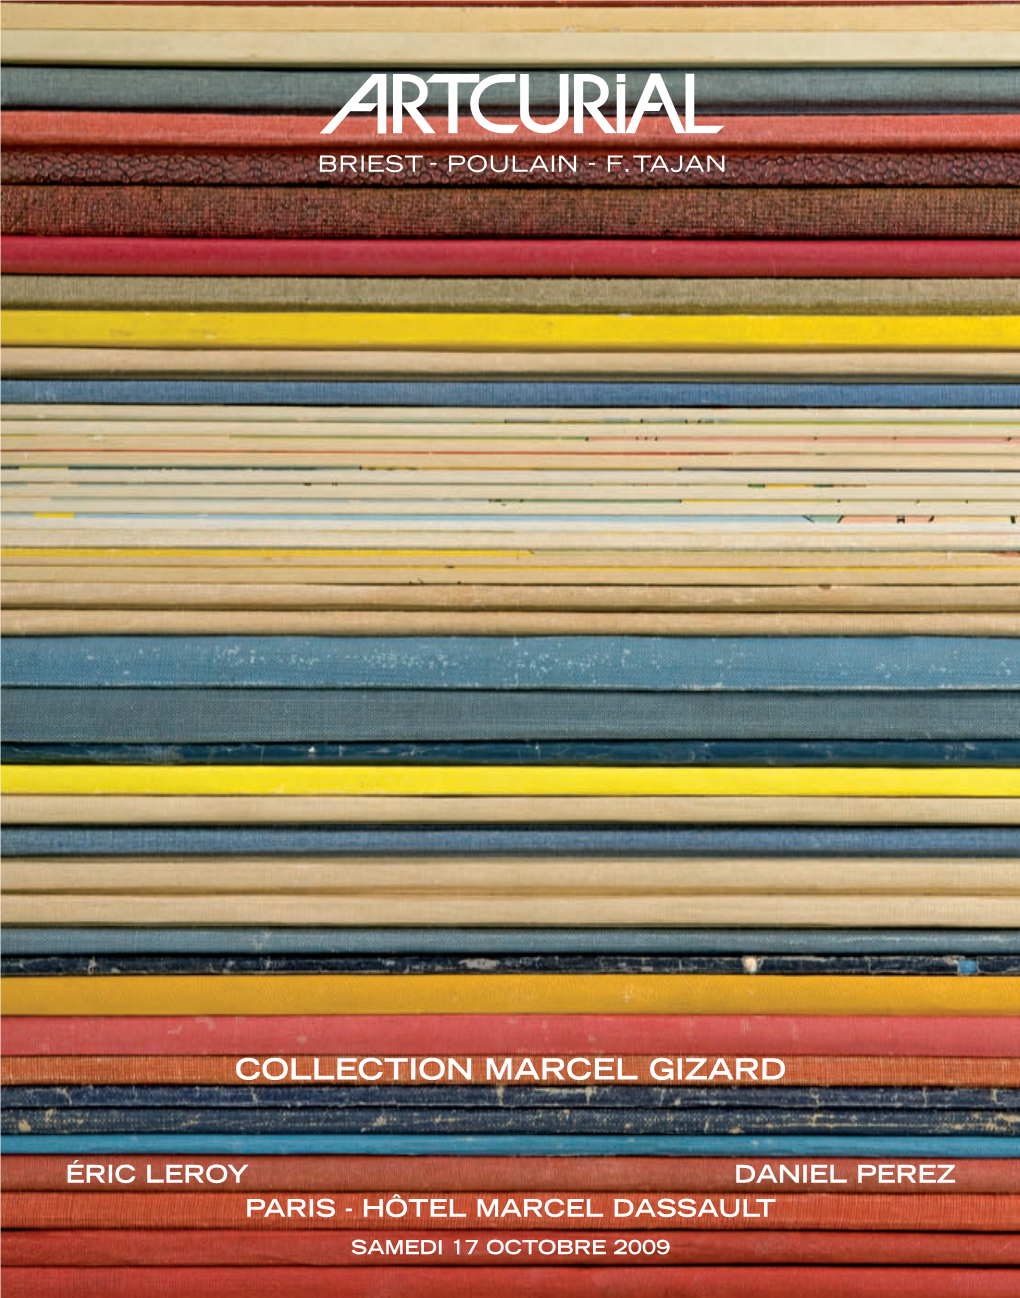 Collection Marcel Gizard